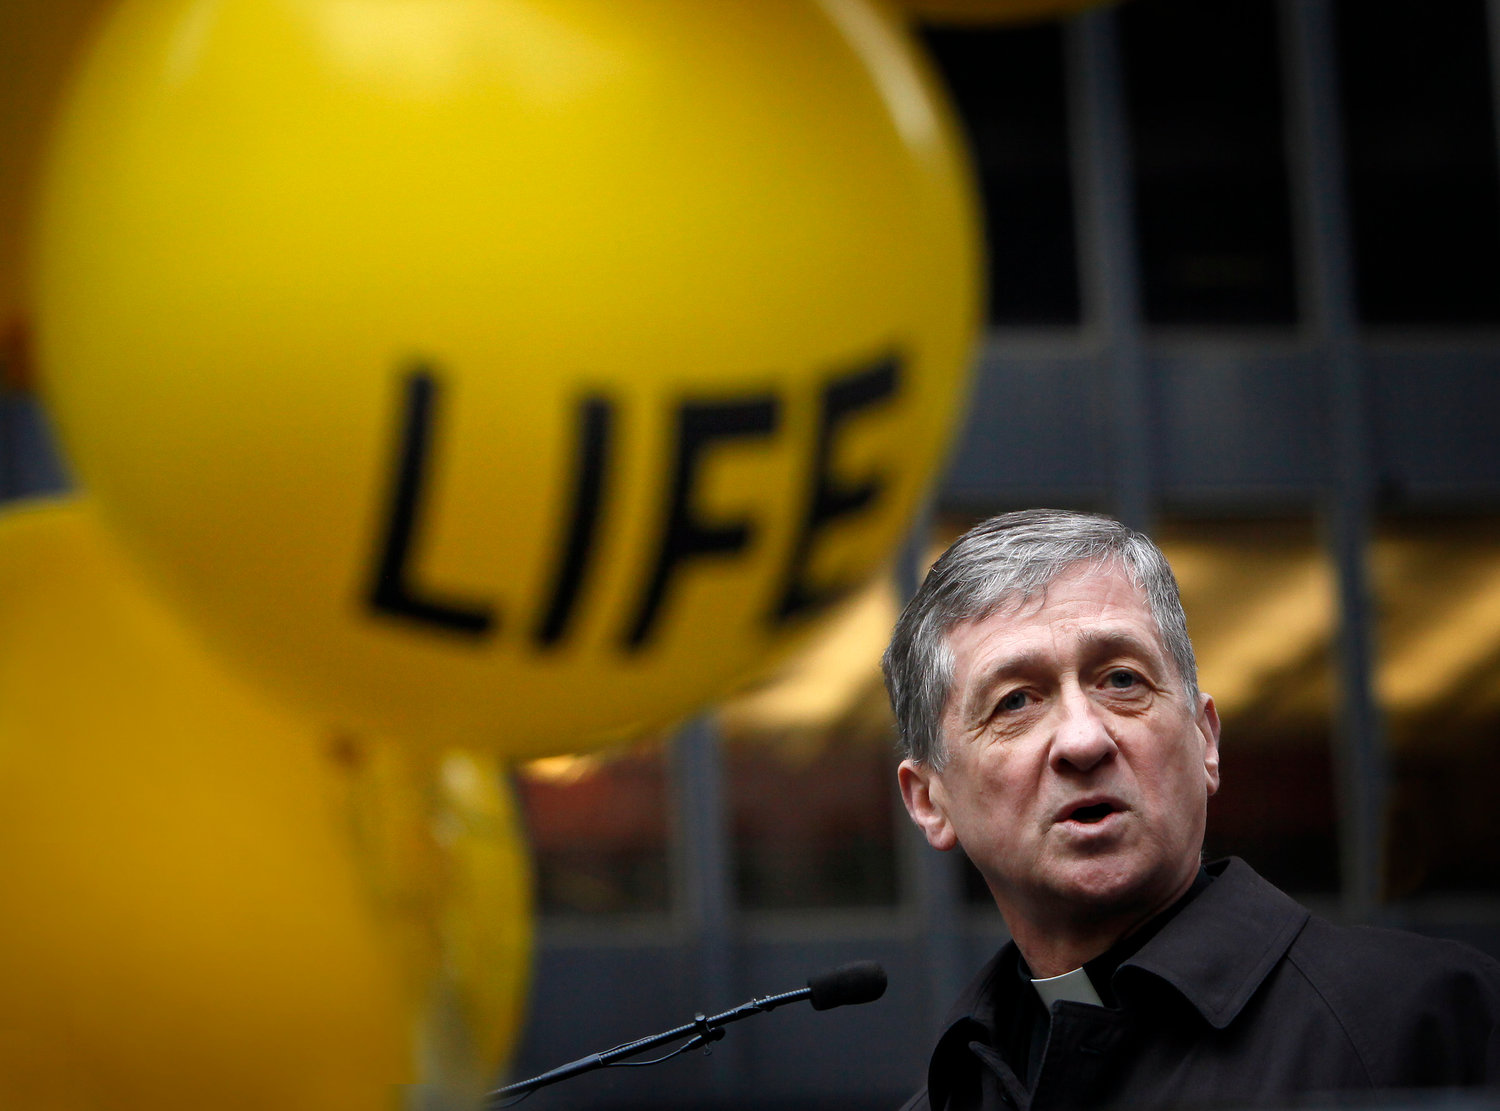 Chicago Cardinal Blase J. Cupich, pictured in a Jan. 18, 2015, photo, and other Illinois bishops, are urging the state’s lawmakers to take no action on a bill that “dramatically rewrites current abortion law, and goes further than Roe v. Wade.”